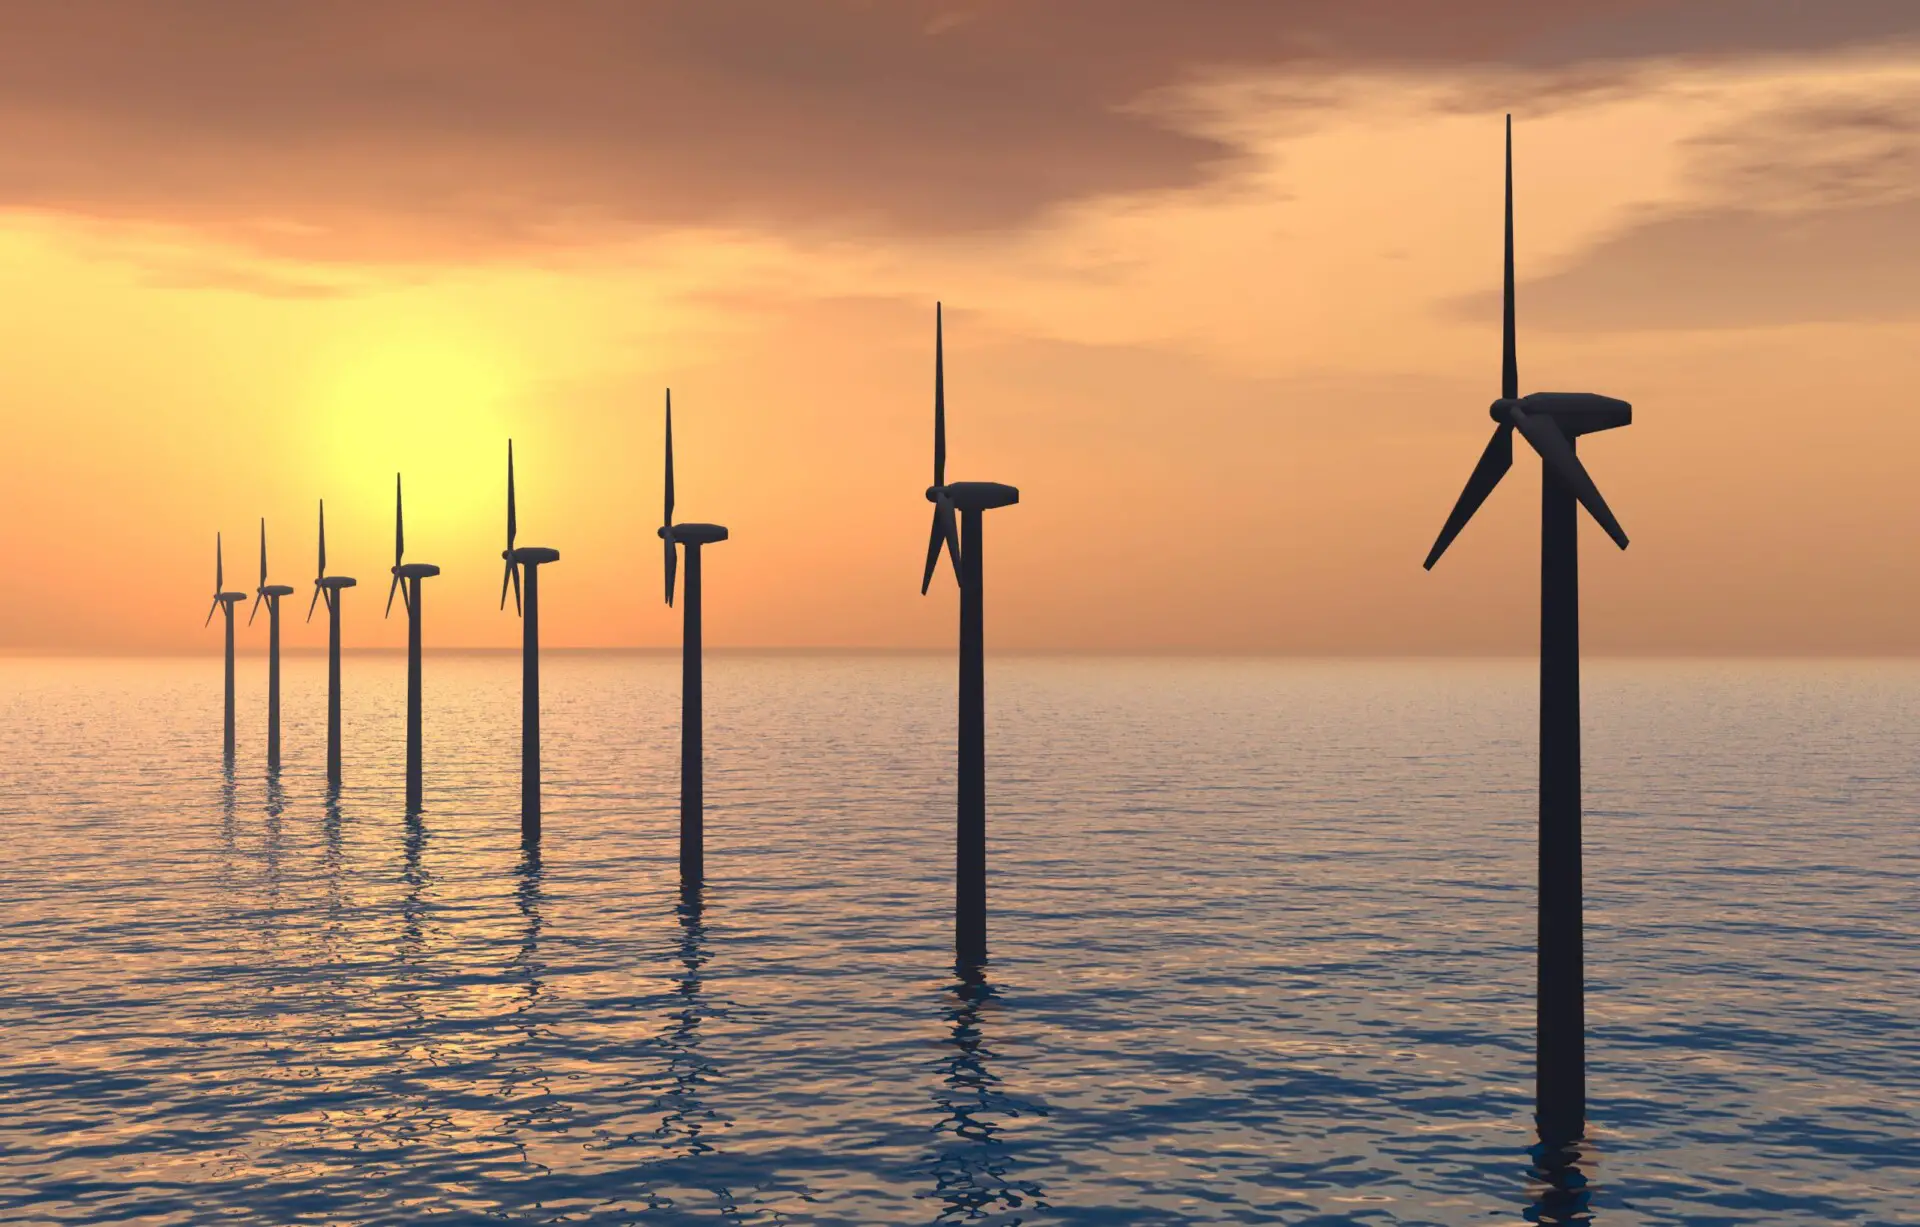 Are Offshore Wind Farms Bad for the Environment? 3 Quick Facts